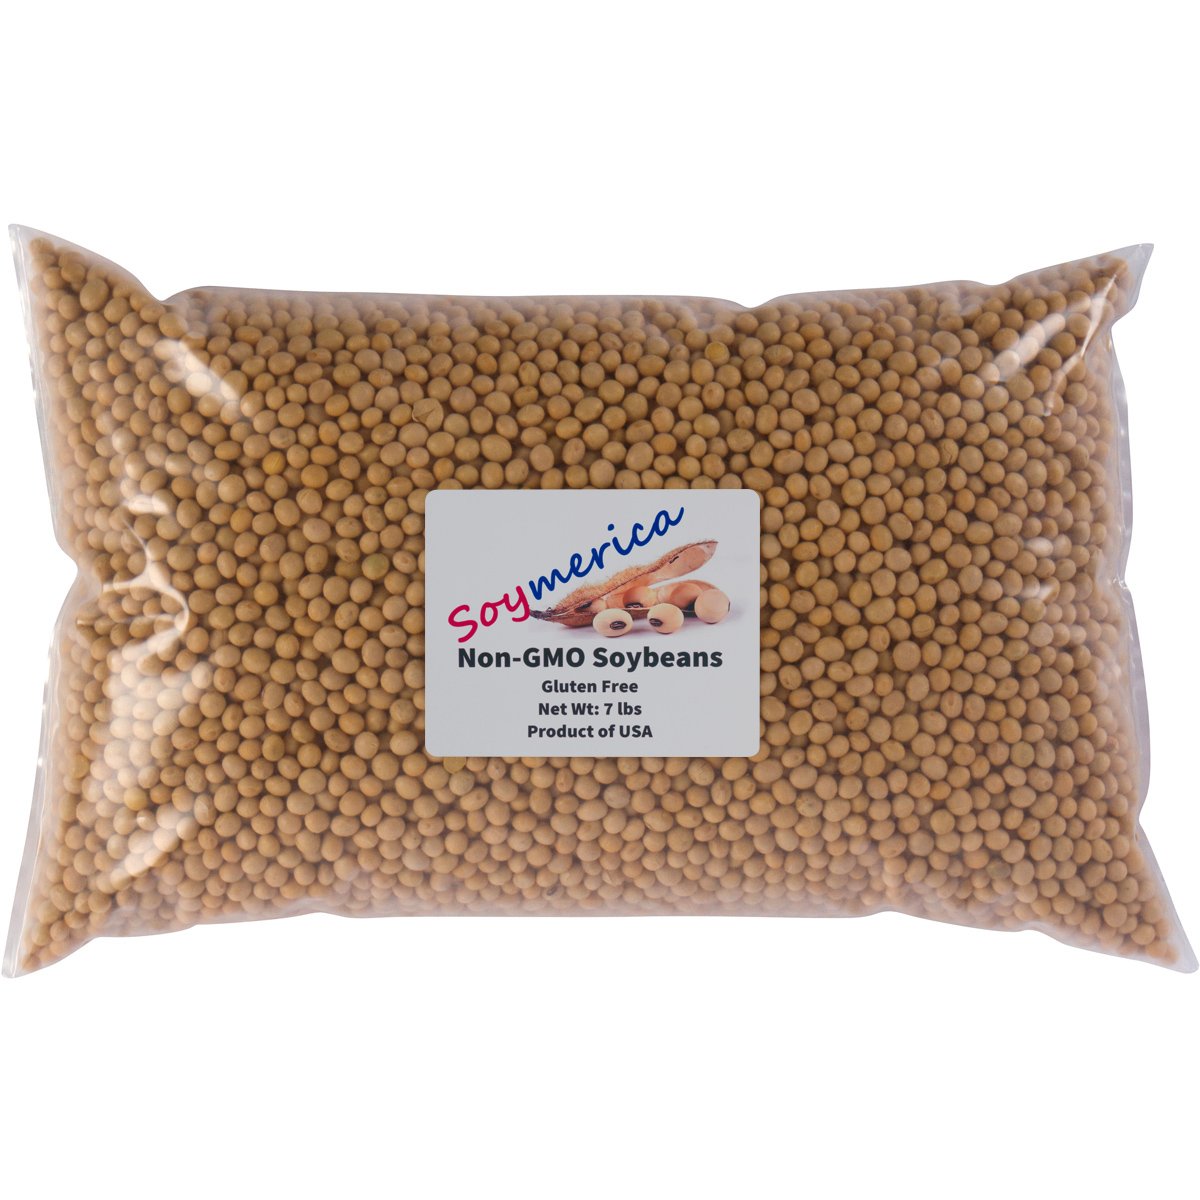 A bag of peanuts on a white background.